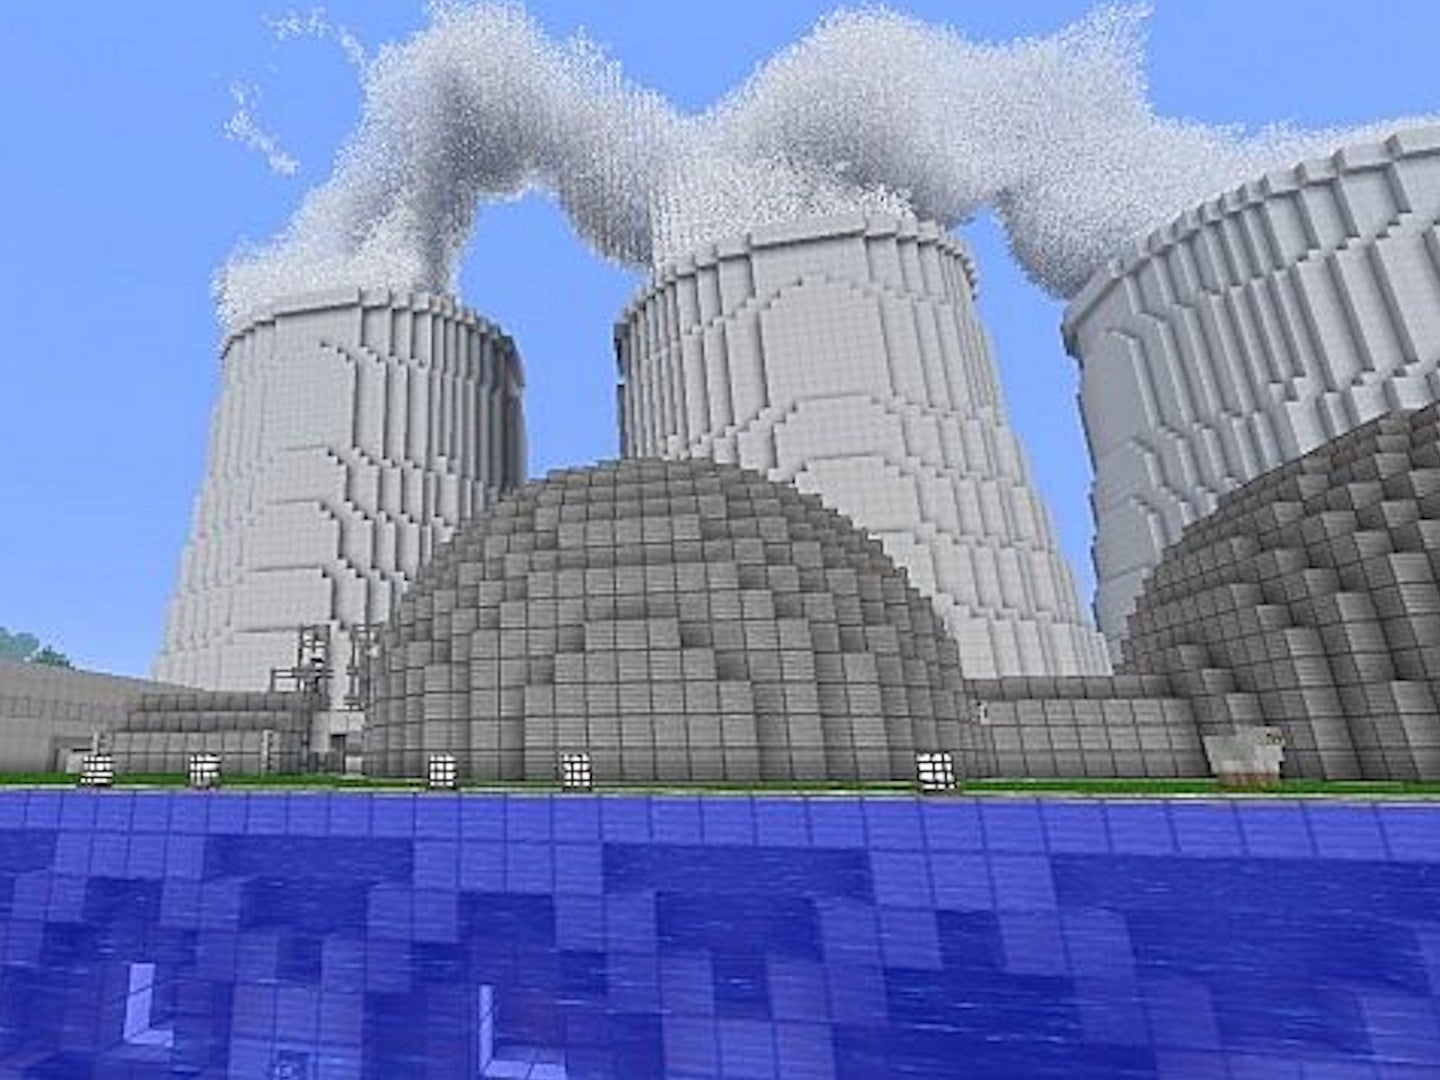 Nuclear power plant model made in Minecraft